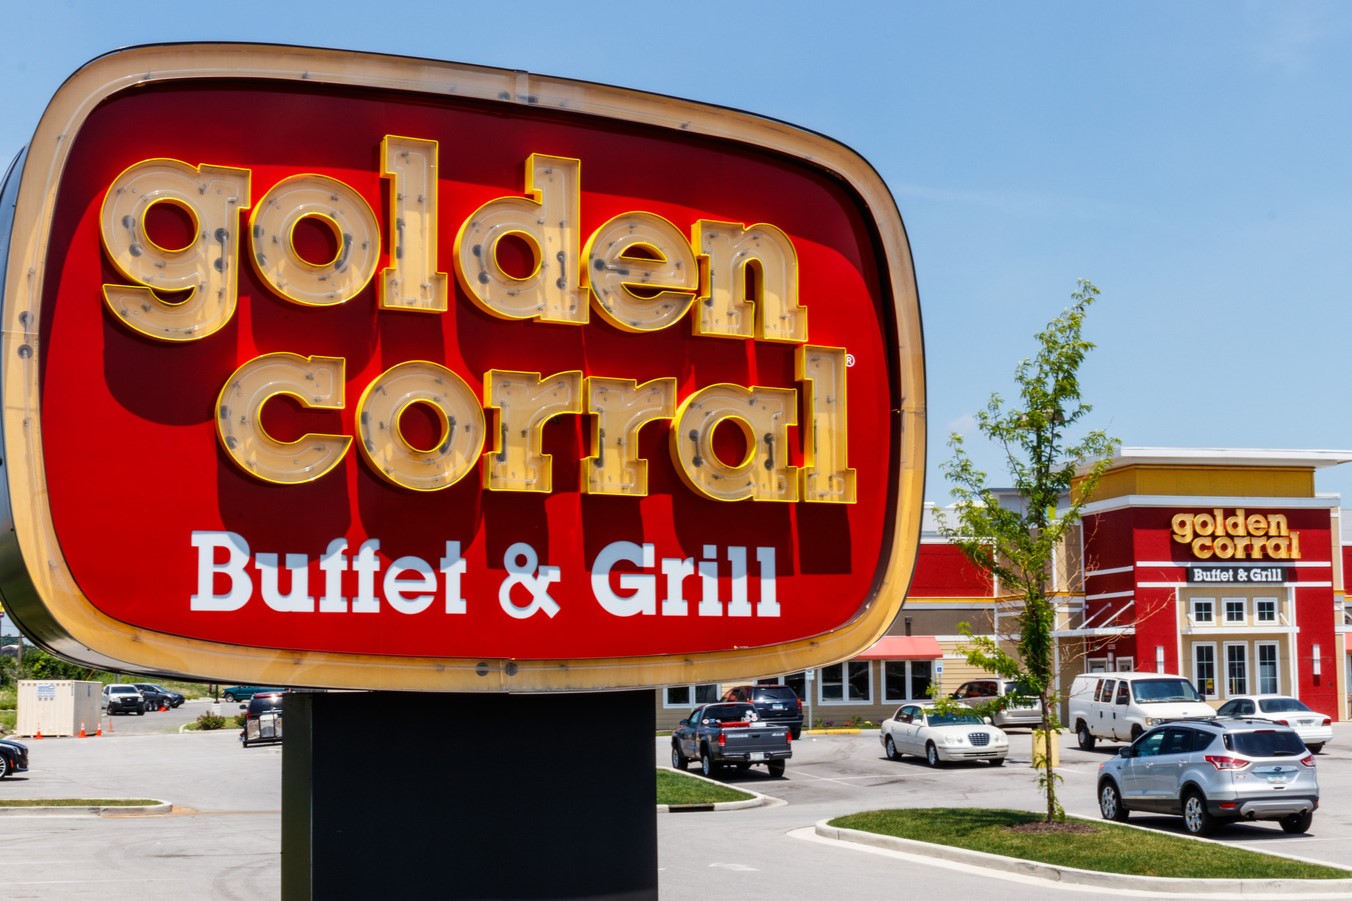 You Won't Believe When Golden Corral Serves Lunch!